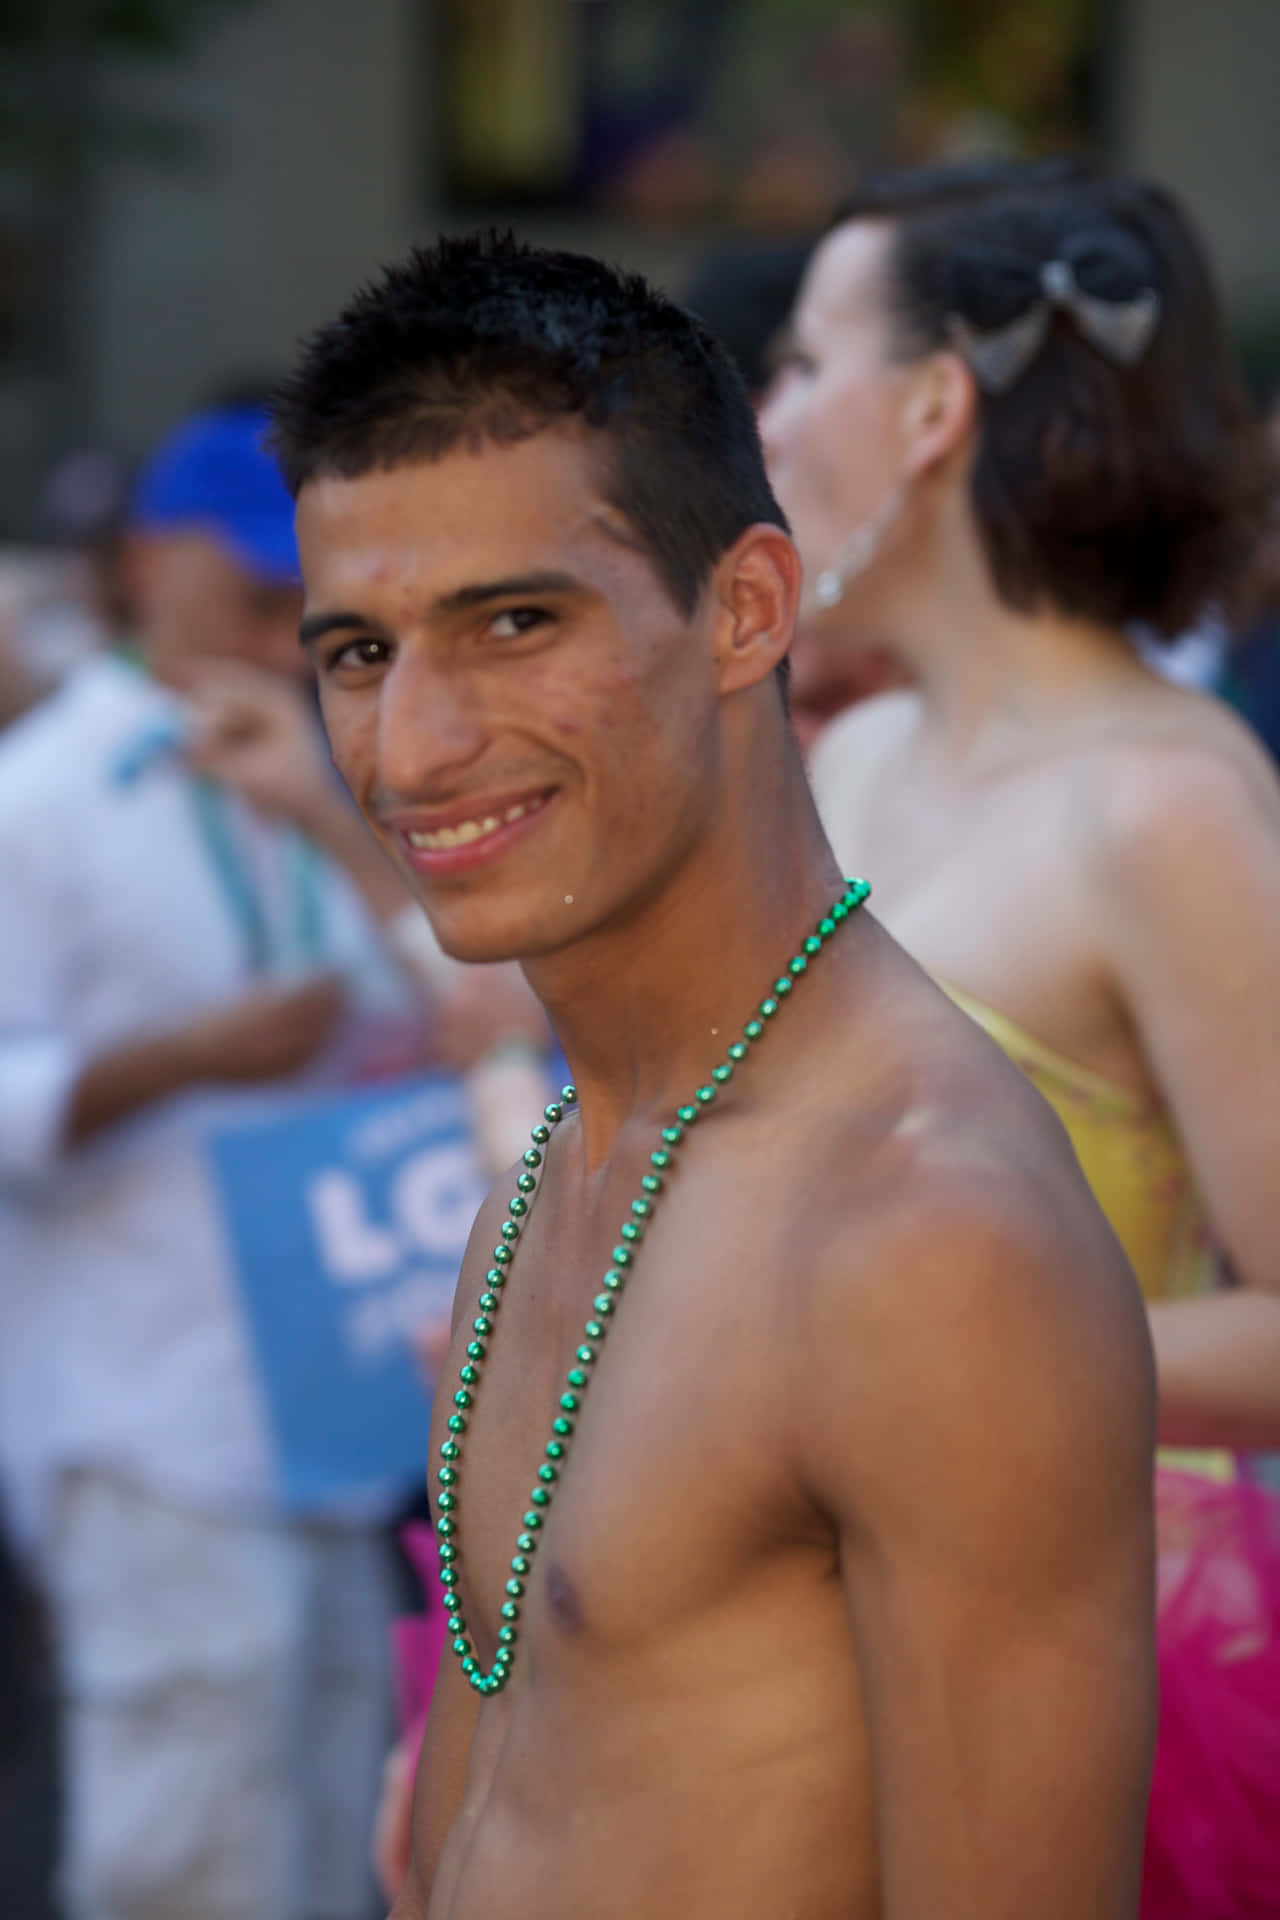 Gaylatino Green Beads Can Be Translated To 